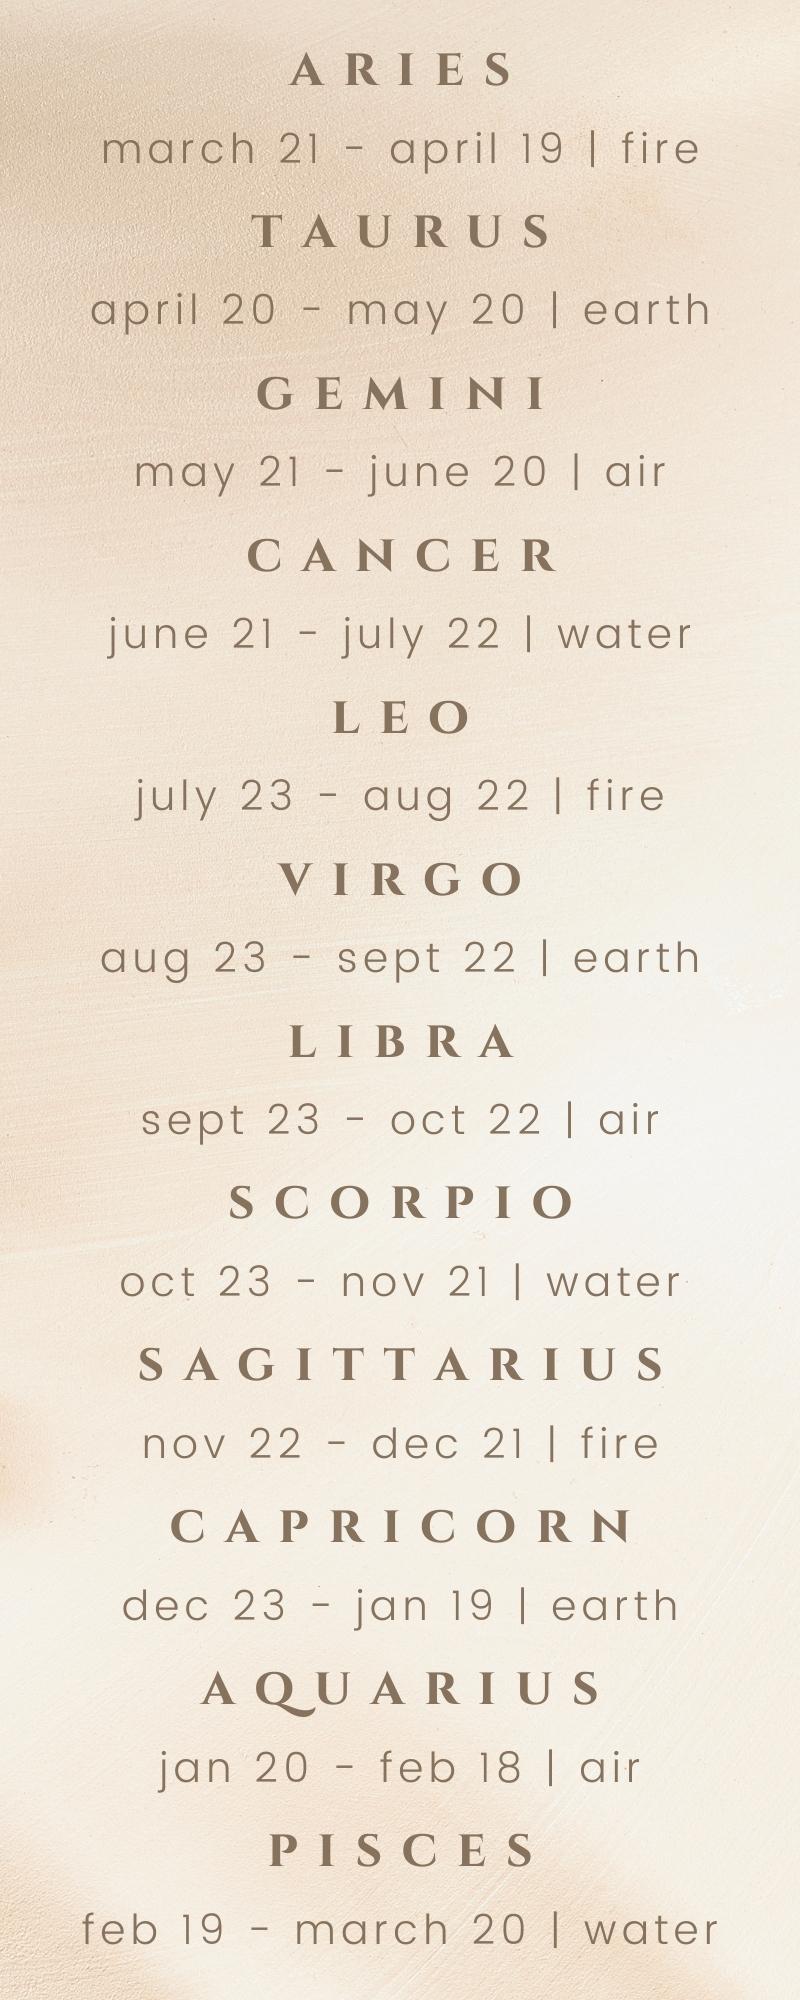 A list of the zodiac signs and corresponding dates